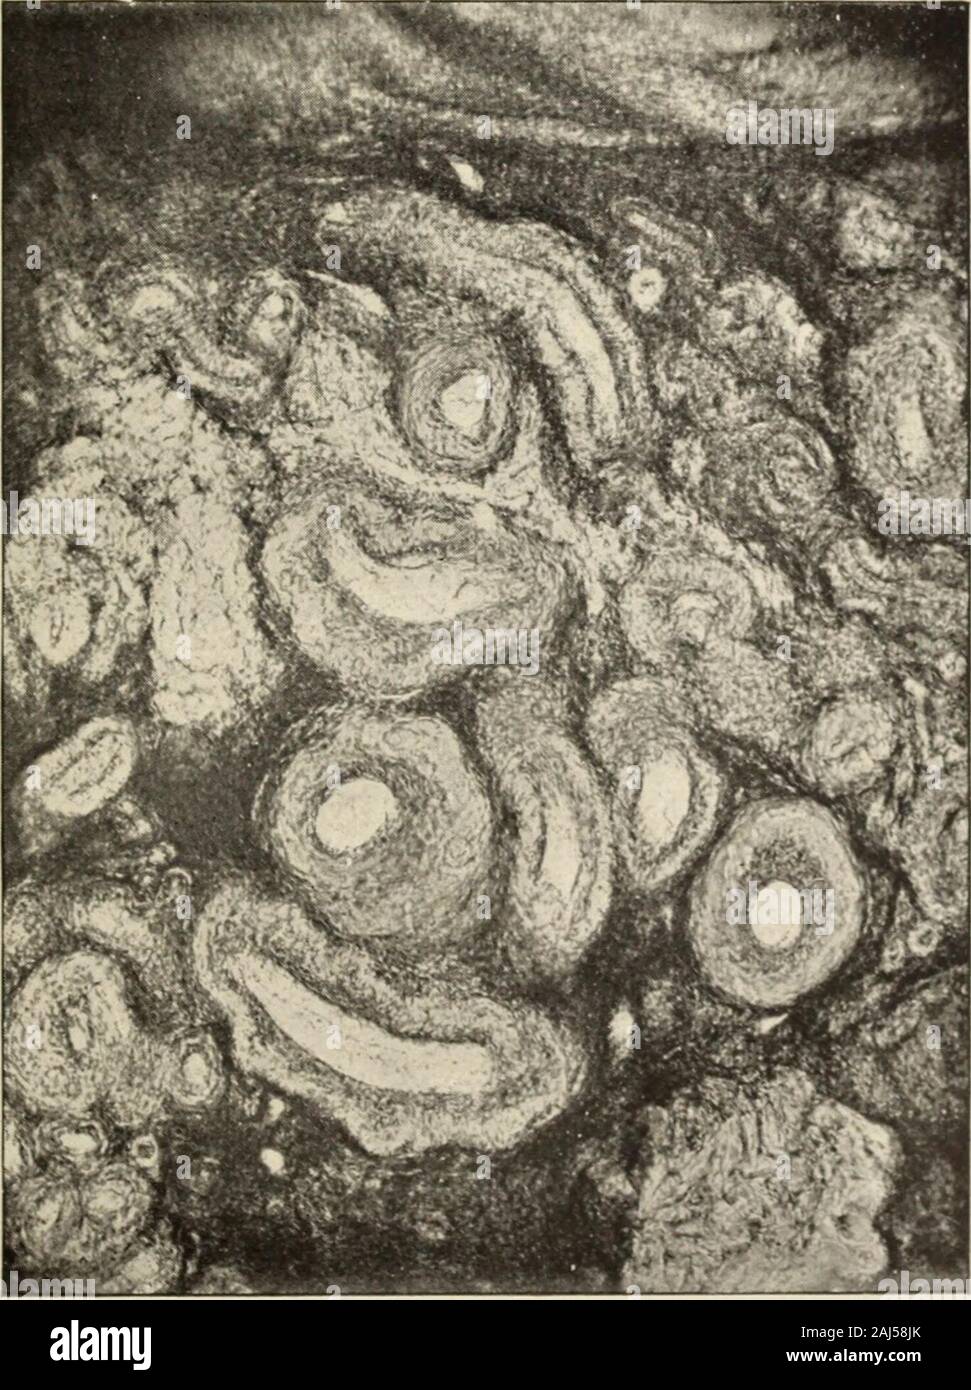 The Hahnemannian monthly . Ovarian cortex transformed into fibrous tissue.Multiplied 200 times. Fig. 8.. Endoarteritis obliterans and arterio-sclerosis. Beginning gyroina.Multiplied 50 times. 1894.] Some Pathological Conditions of the Ovaries. 89 stroyed. Besides, it is these conditions with which pre-eminentlyare associated the distressing and persistent pains in the ovary whichhave often induced the decision to extirpate the gland. It has beenfound also that pathological changes have taken place in all thetissues of the ovary where the gyroma is found. The appearancepresented by this conditi Stock Photo